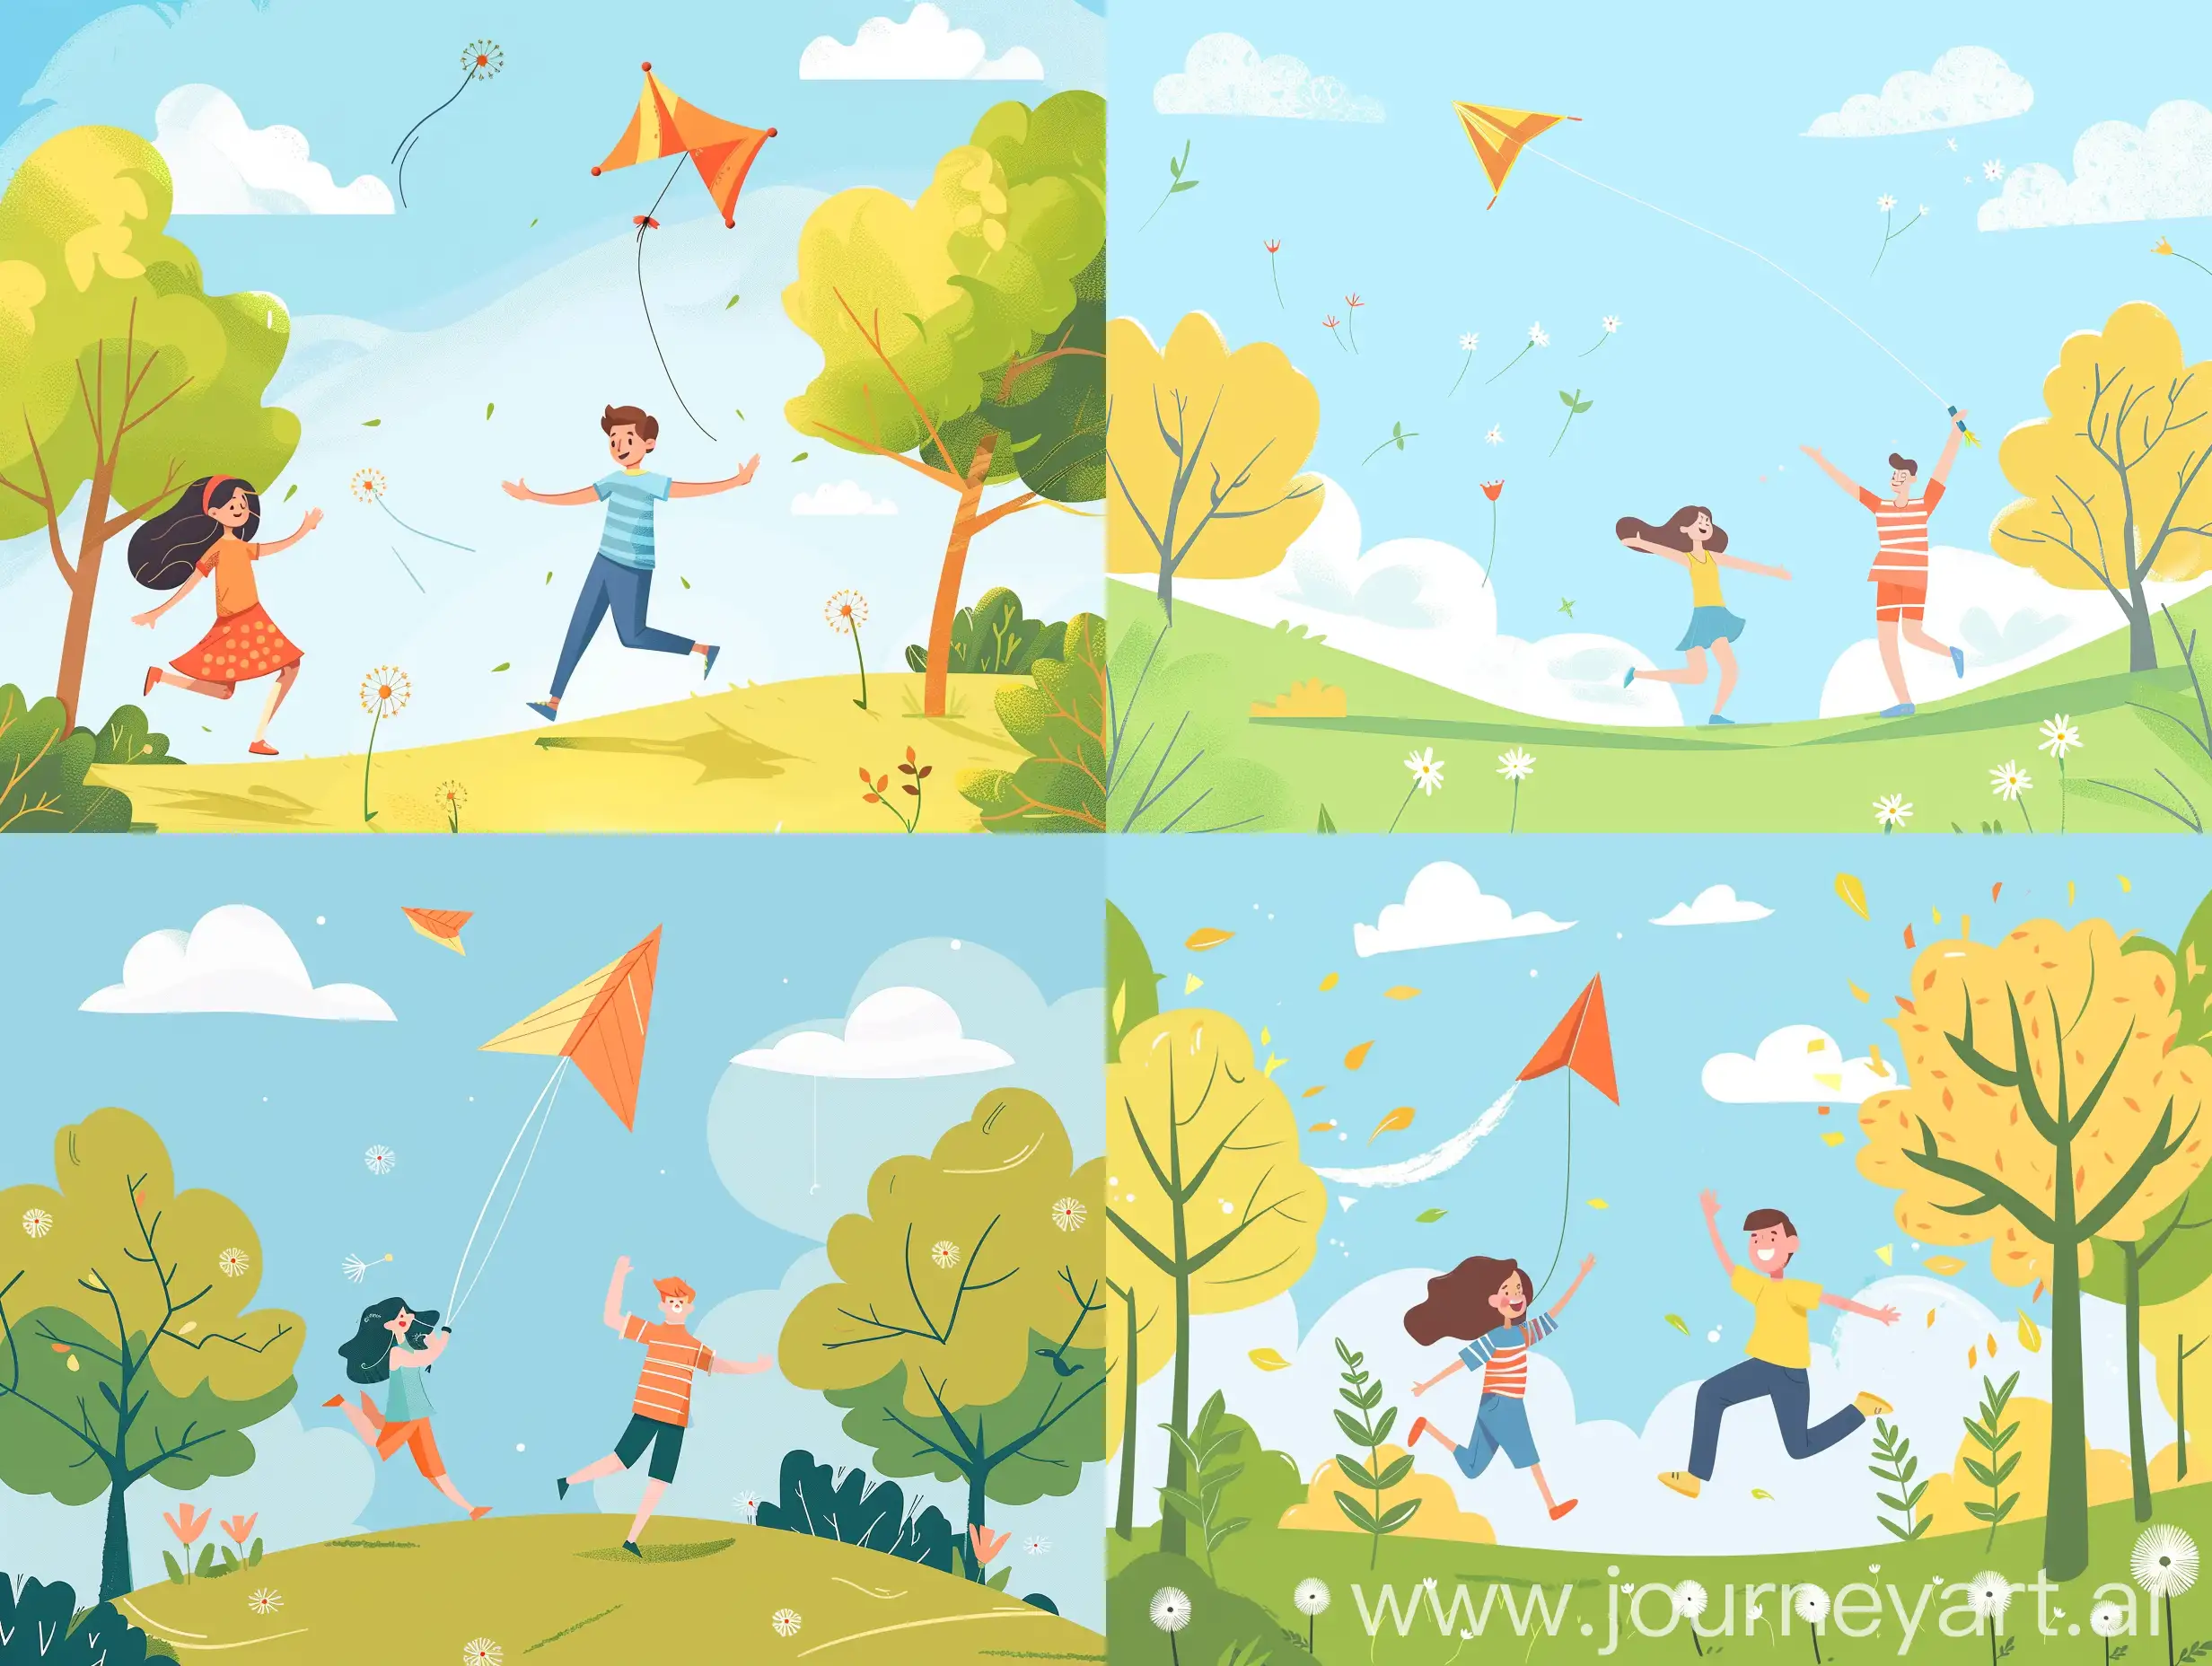 Outdoor-Summer-Camp-Joyful-Kite-Flying-and-Laughter